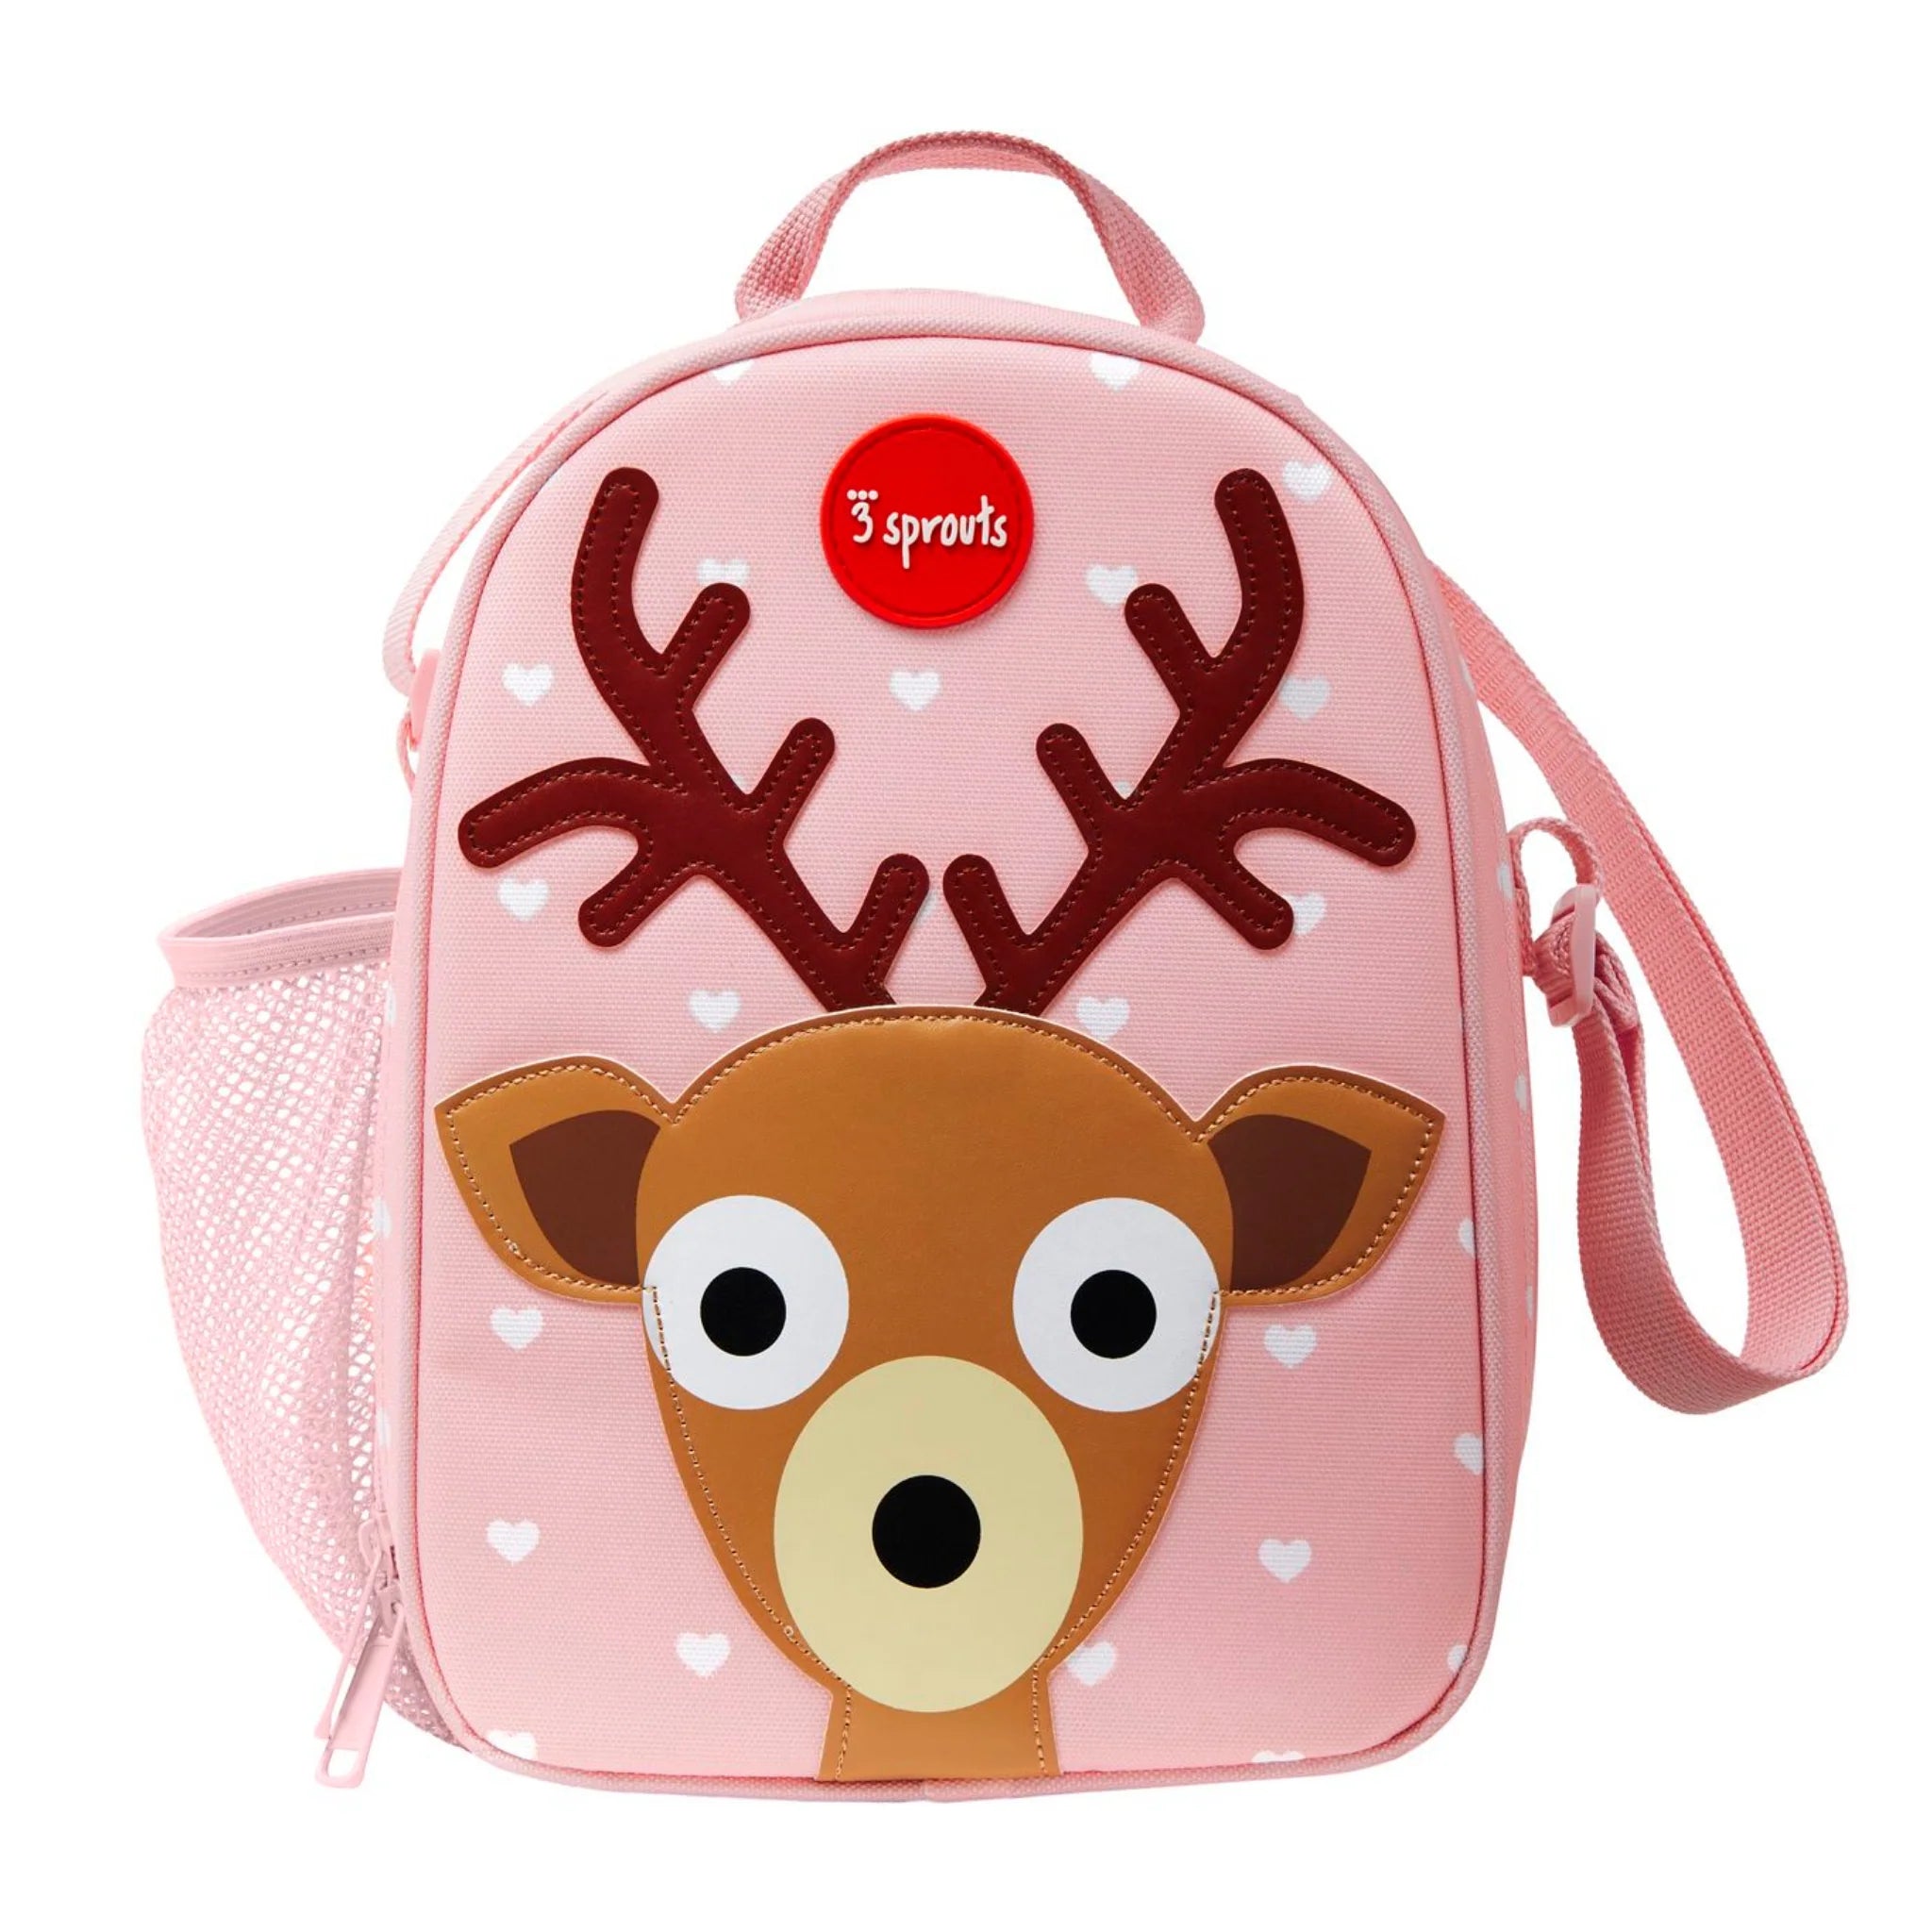 An image of Buy 3 Sprouts Kids Lunch Bag (Deer) - SmallSmart UK